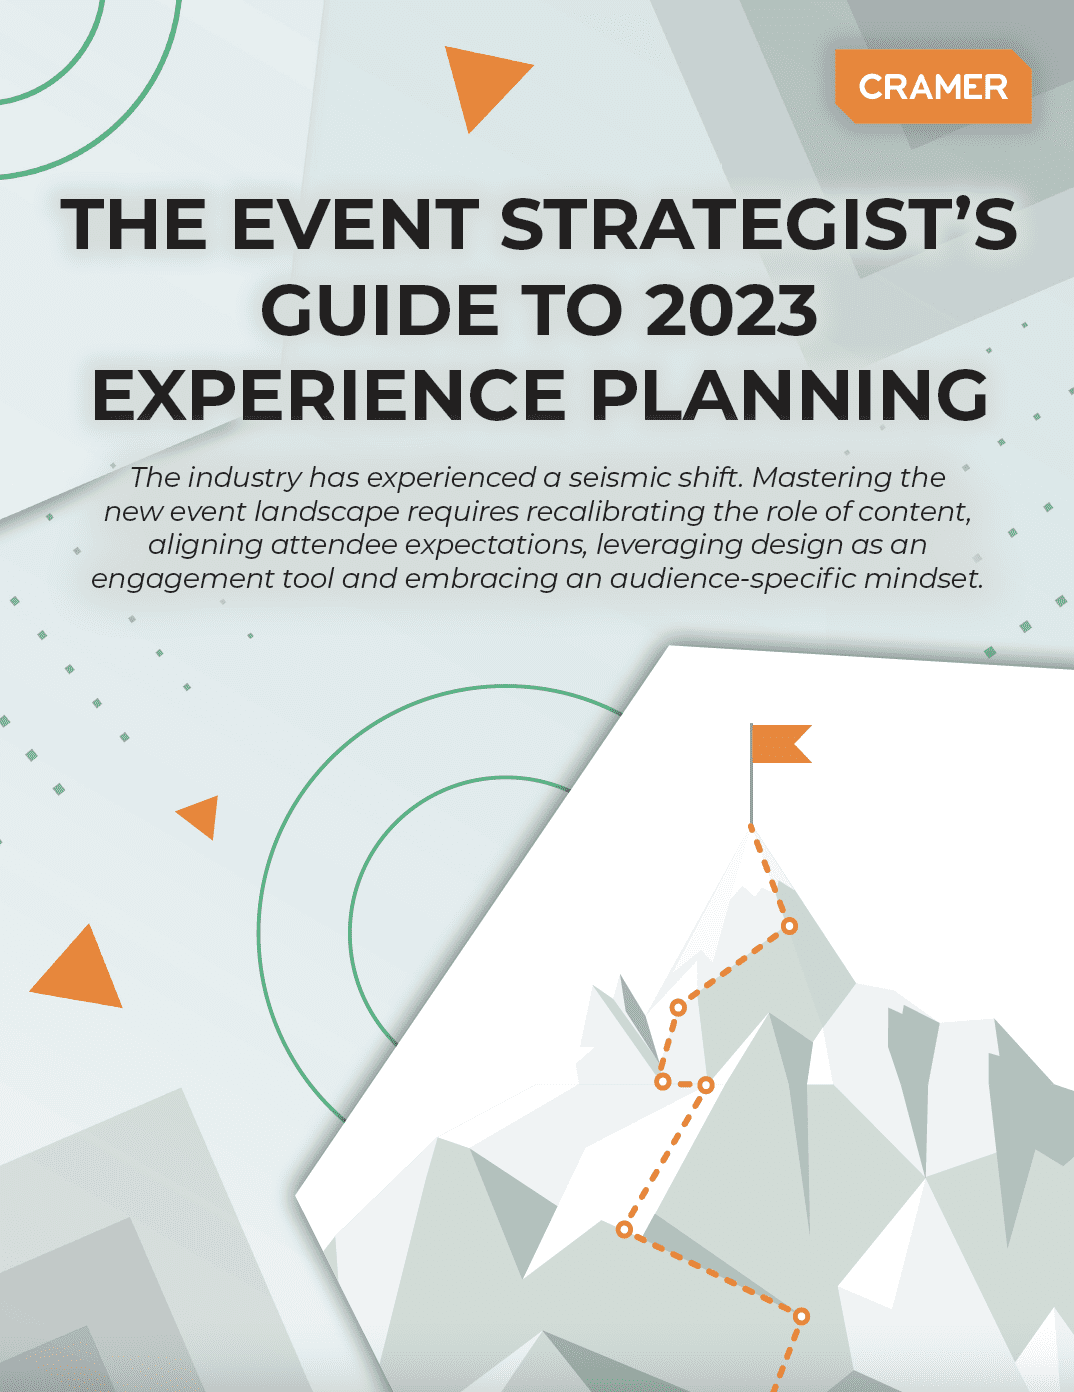 THE EVENT STRATEGIST’S GUIDE TO 2023 EXPERIENCE PLANNING